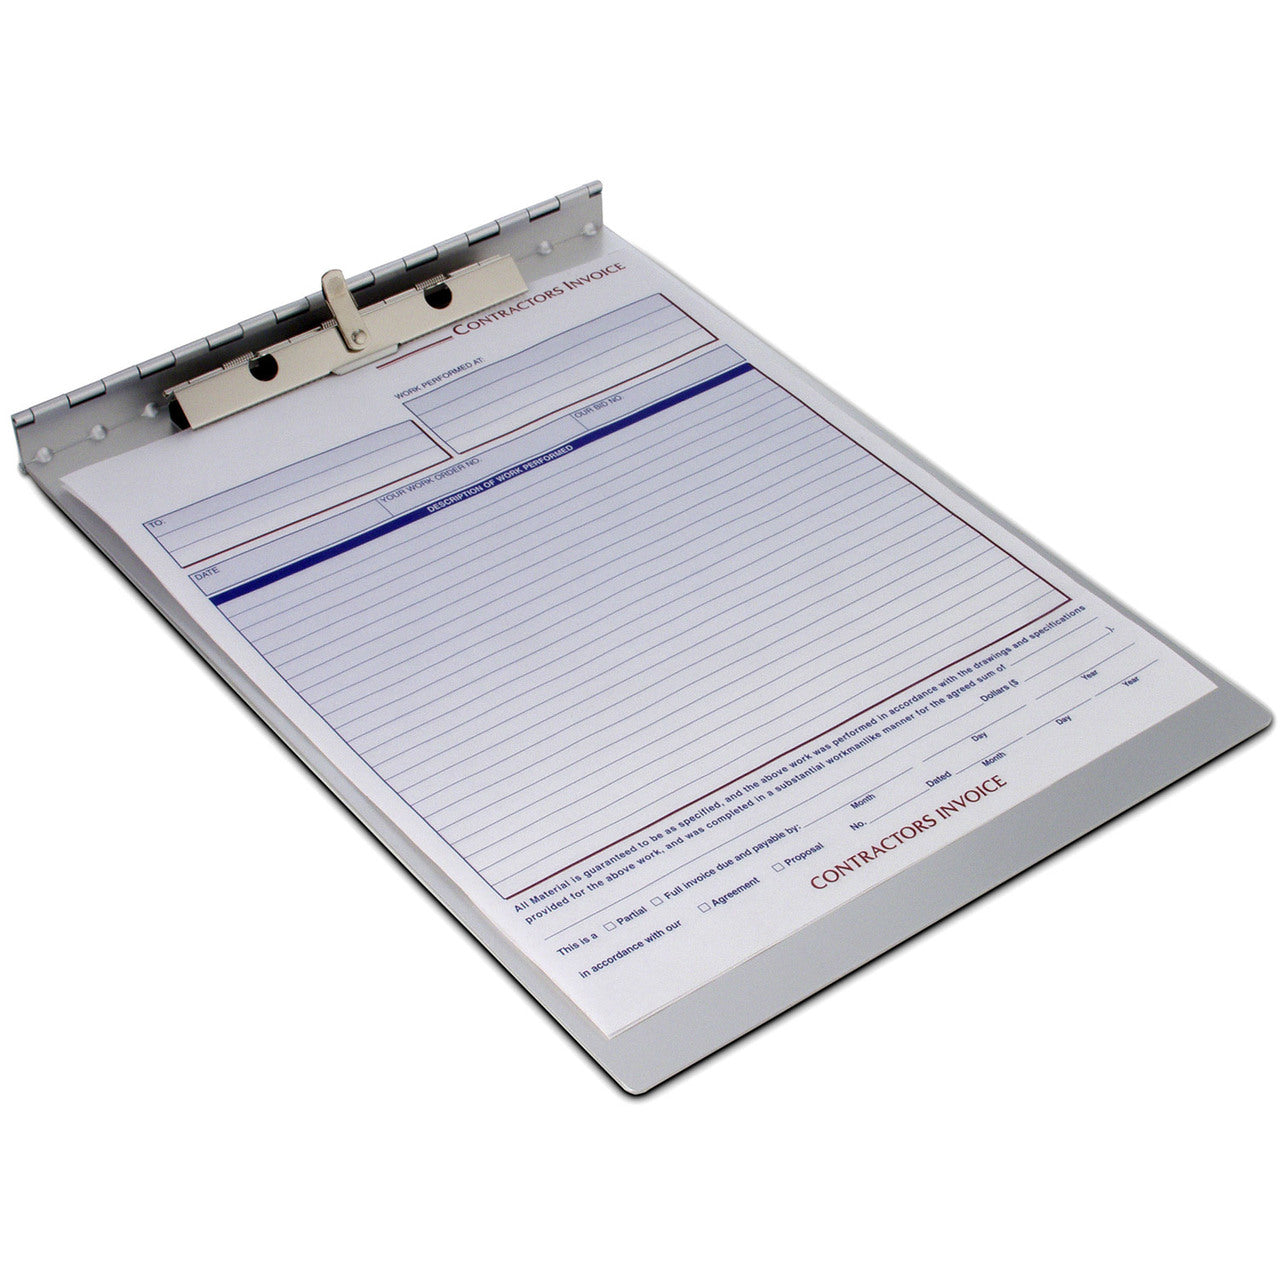 Saunders Clipboard with Privacy Cover - DISCONTINUED